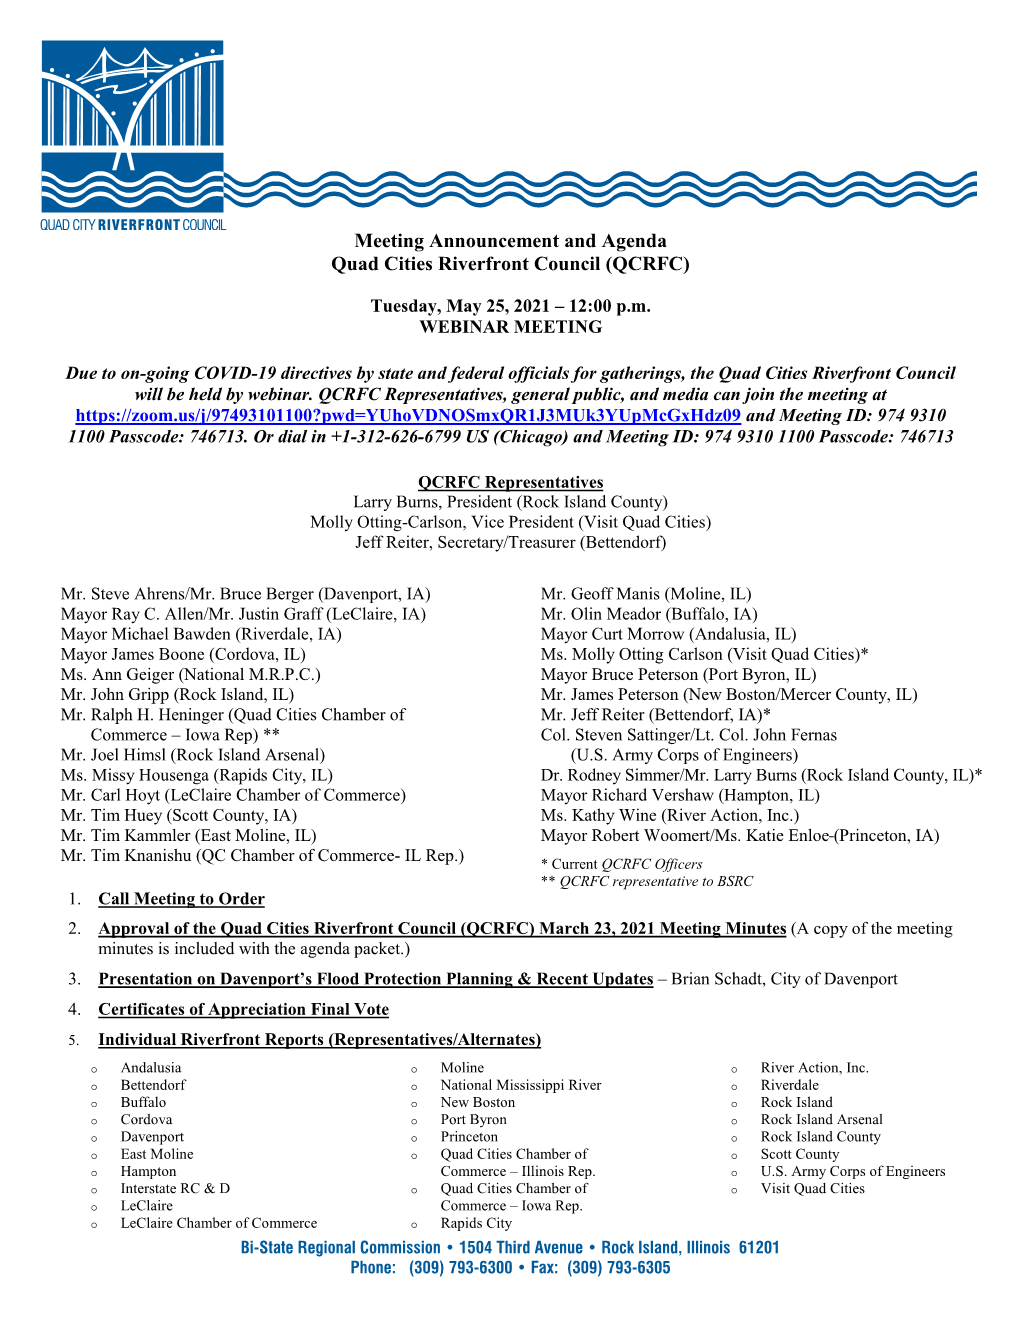 Quad Cities Riverfront Council Meeting Agenda, May 25, 2021